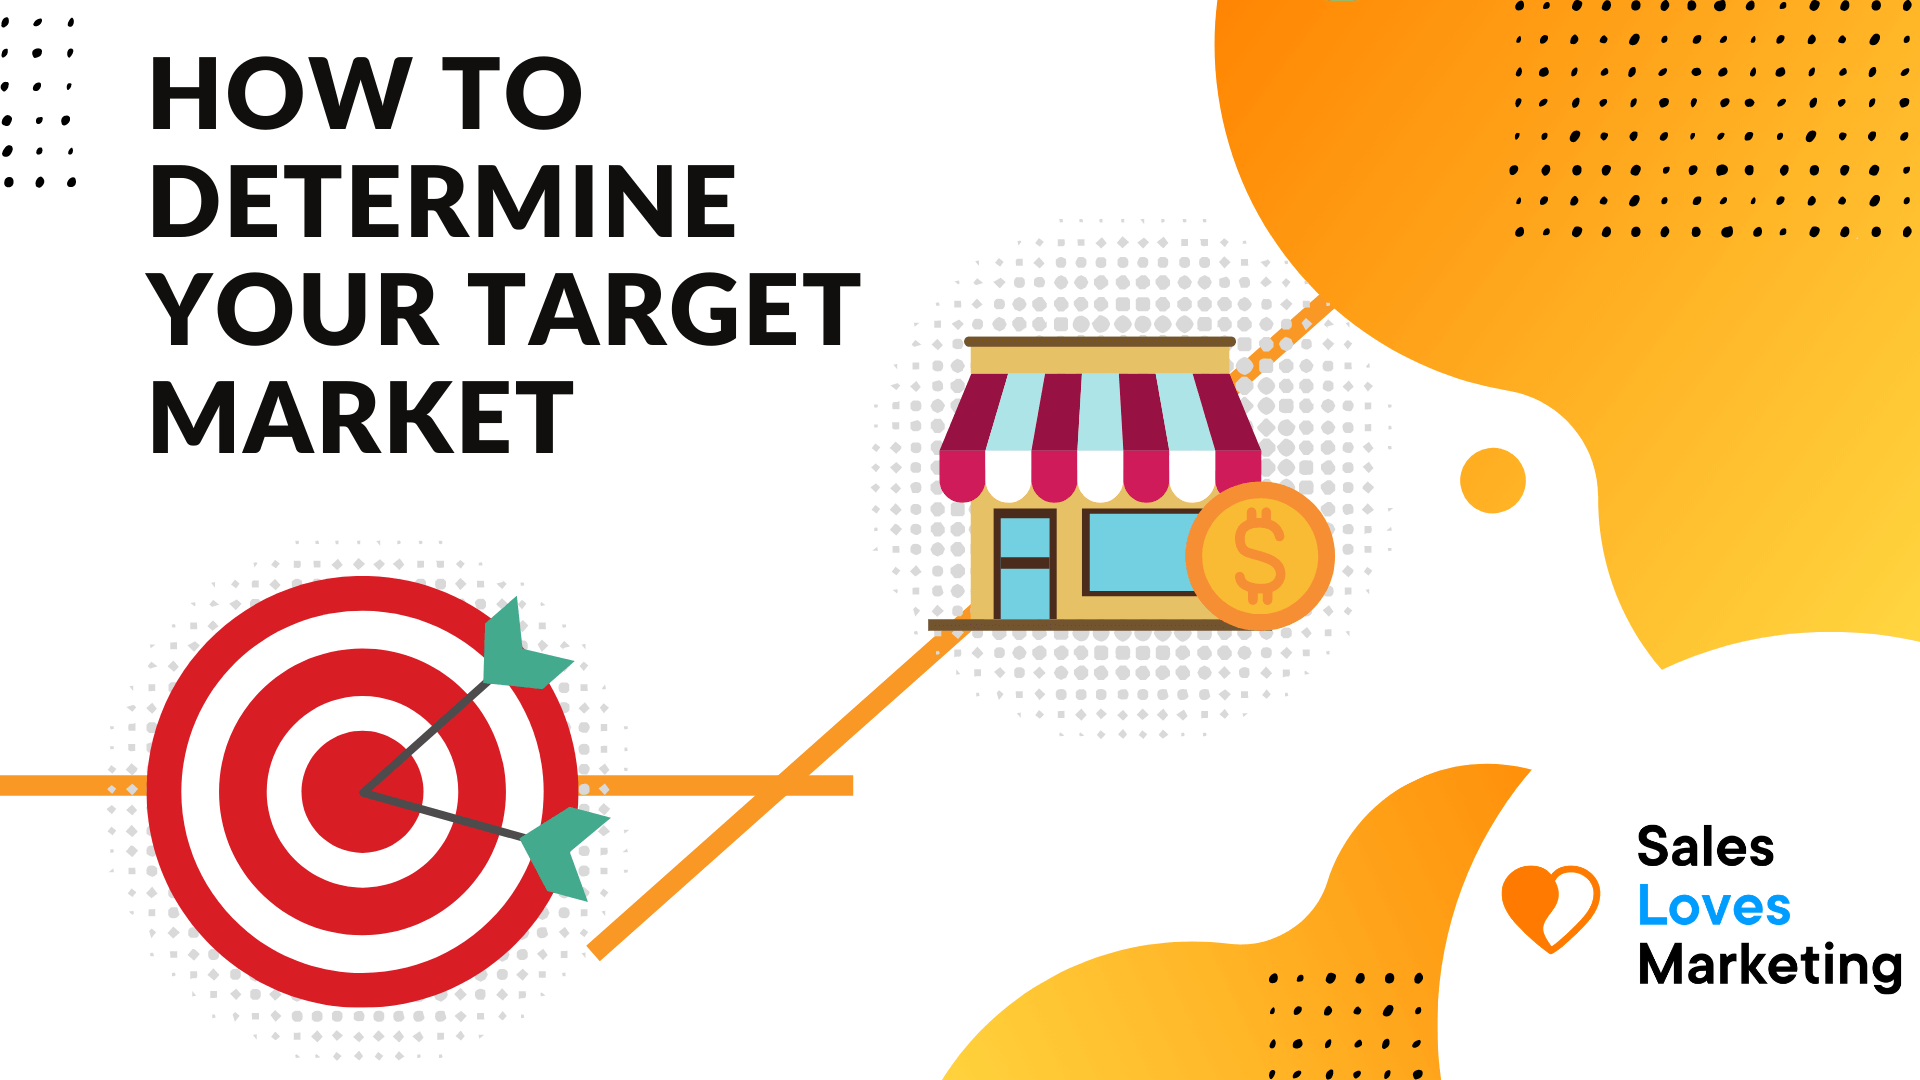 How to Determine Your Target Market For Your Business